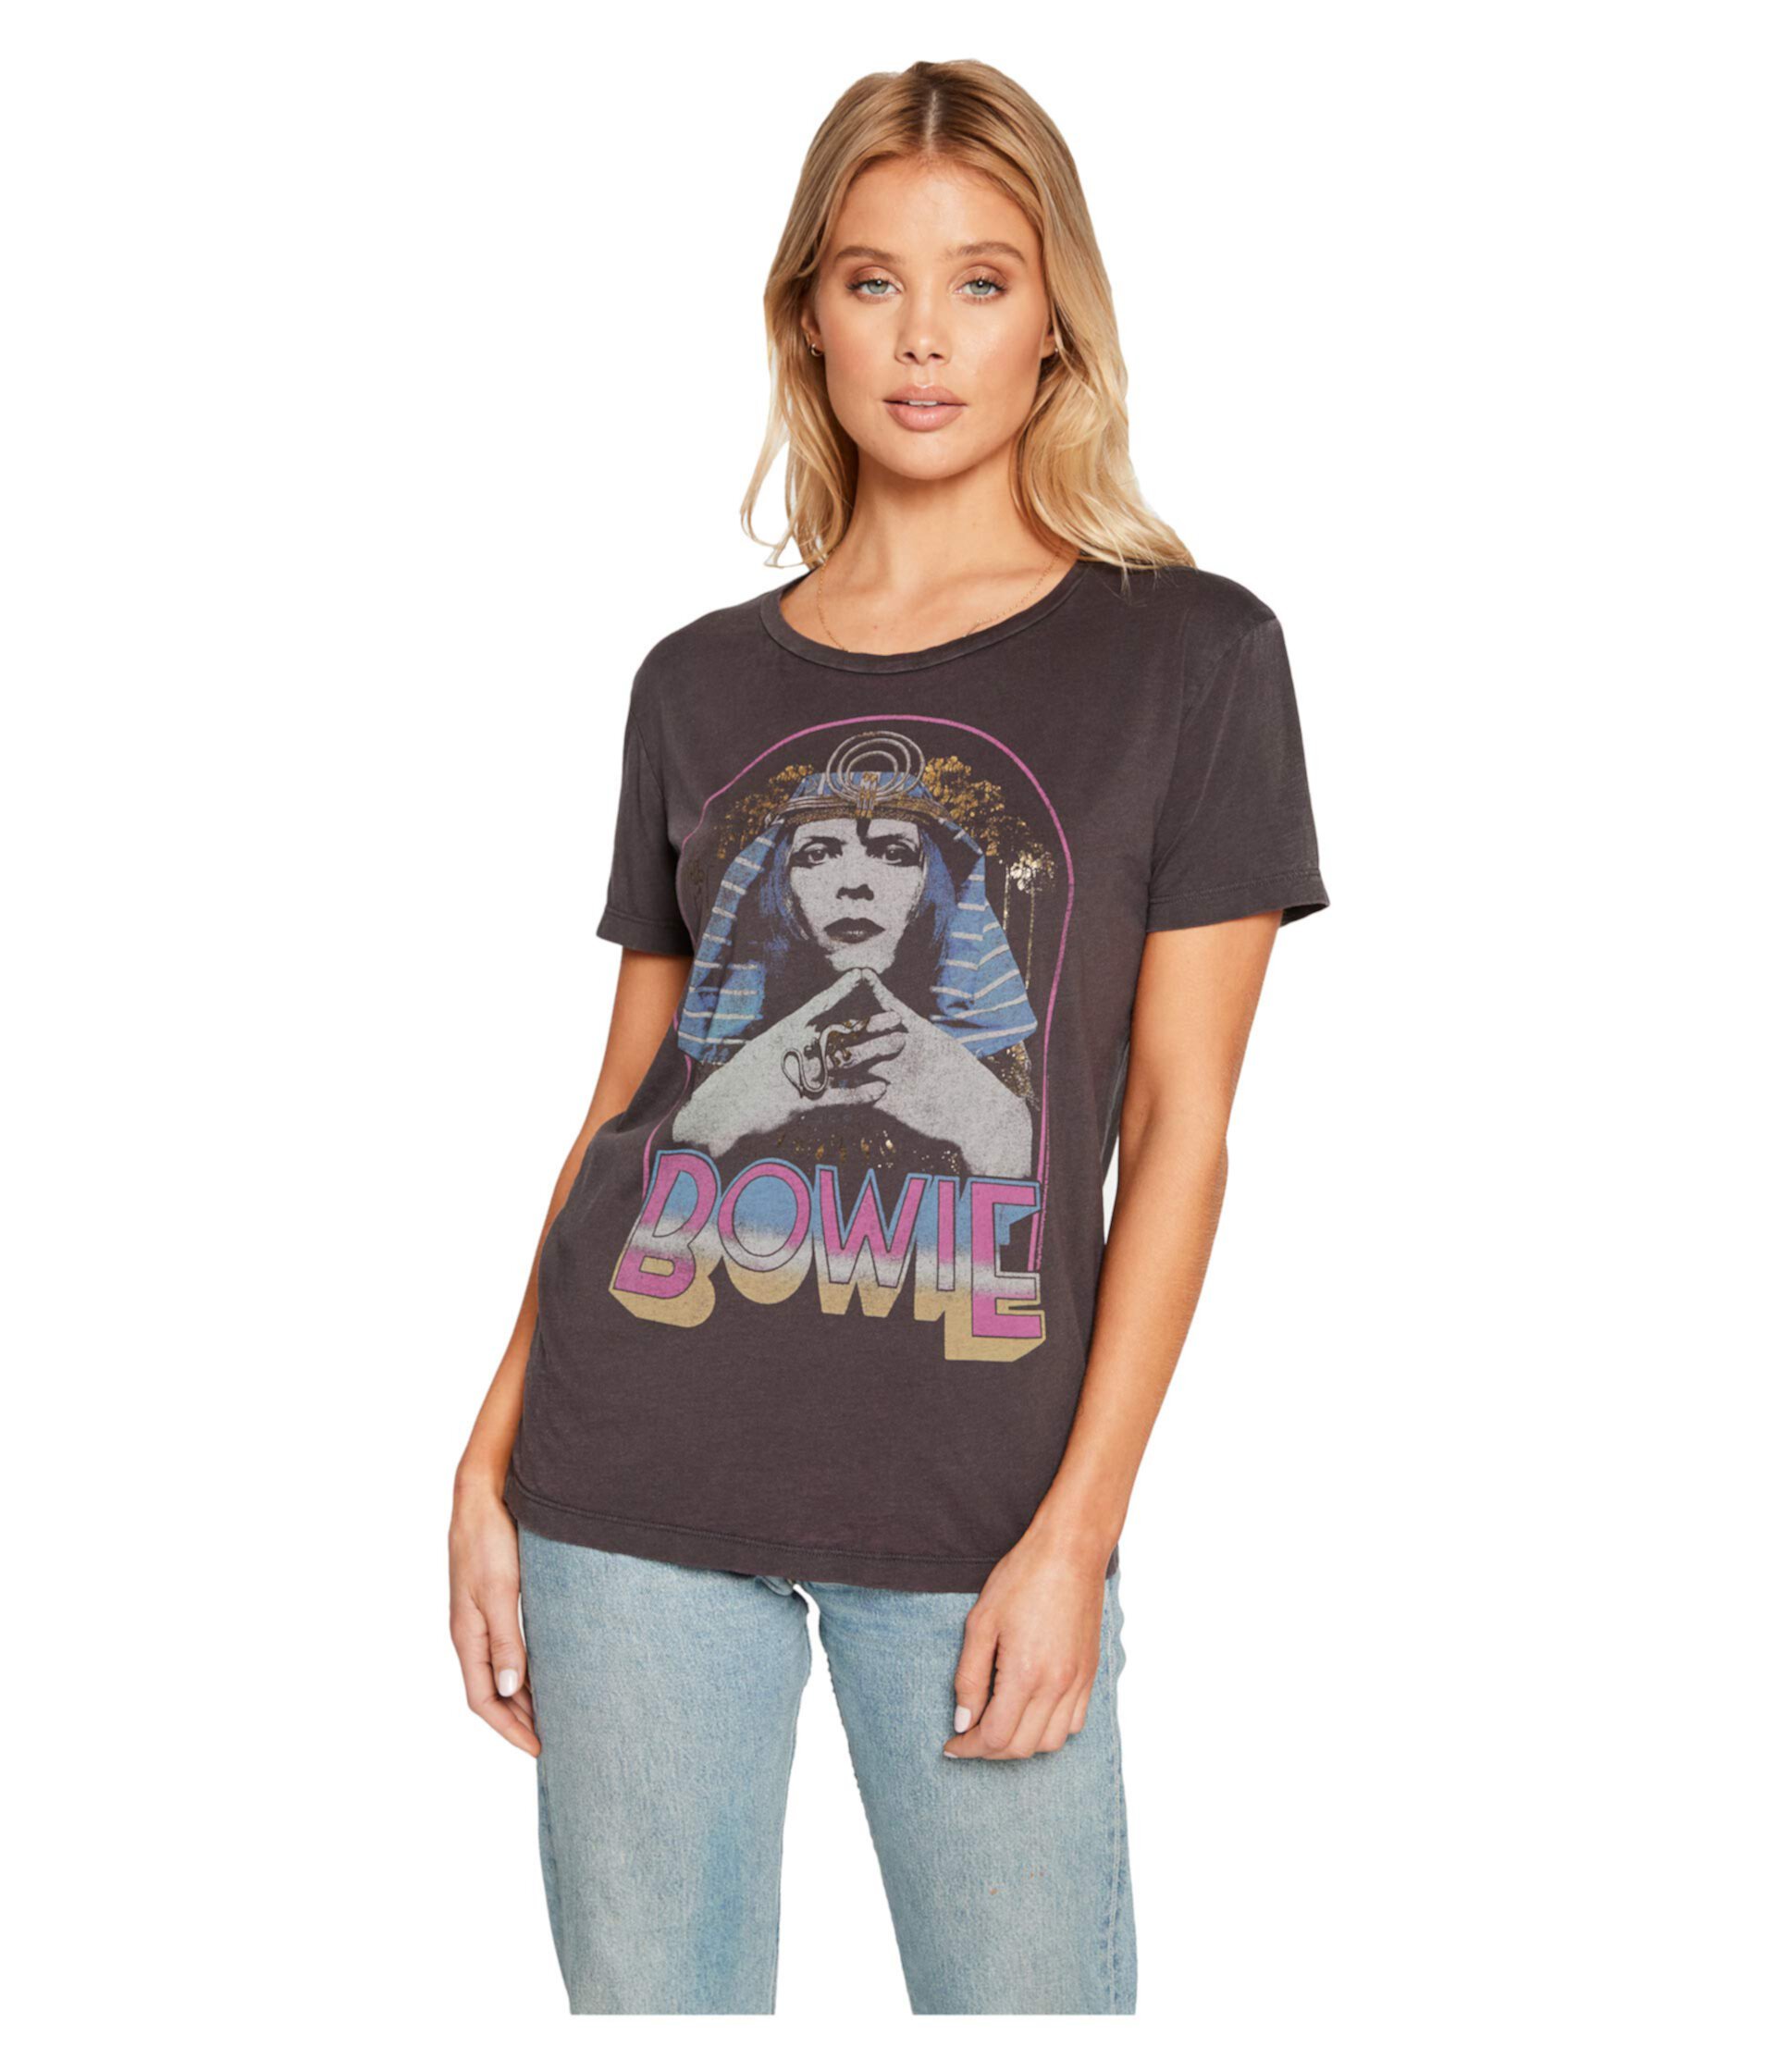 "David Bowie: Sphinx" Recycled Vintage Jersey Tee Chaser